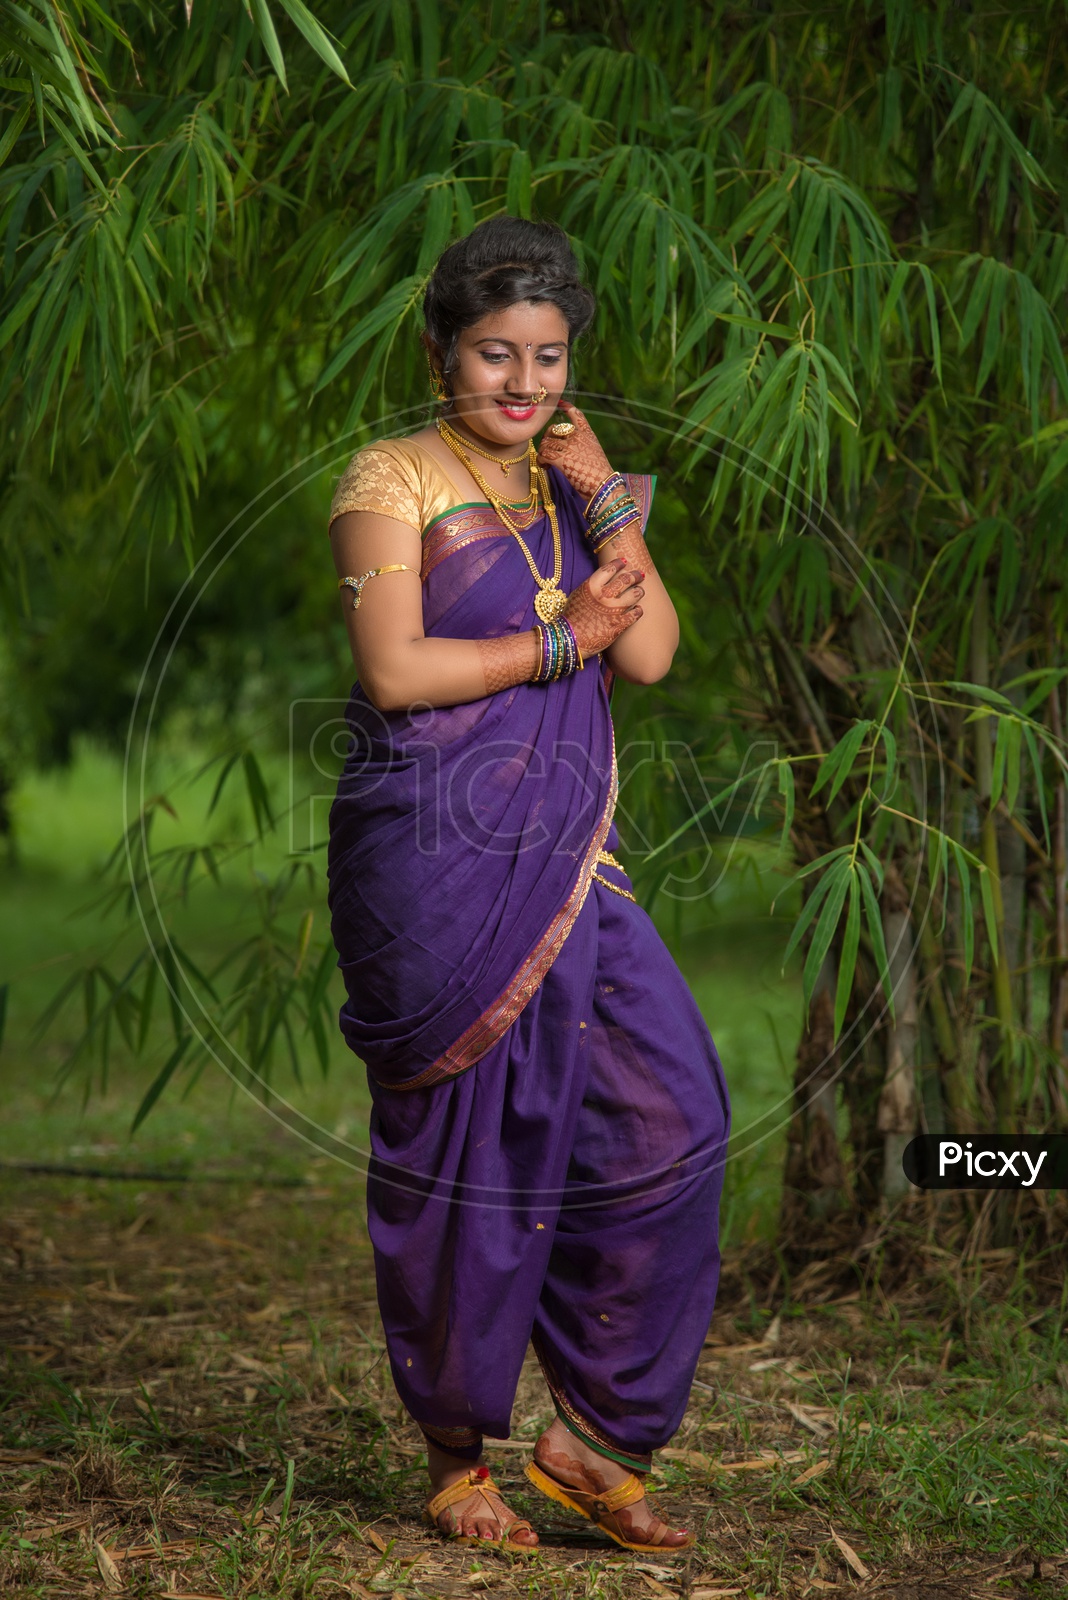 Image of Indian little girl posing wearing traditional dress-XL491159-Picxy